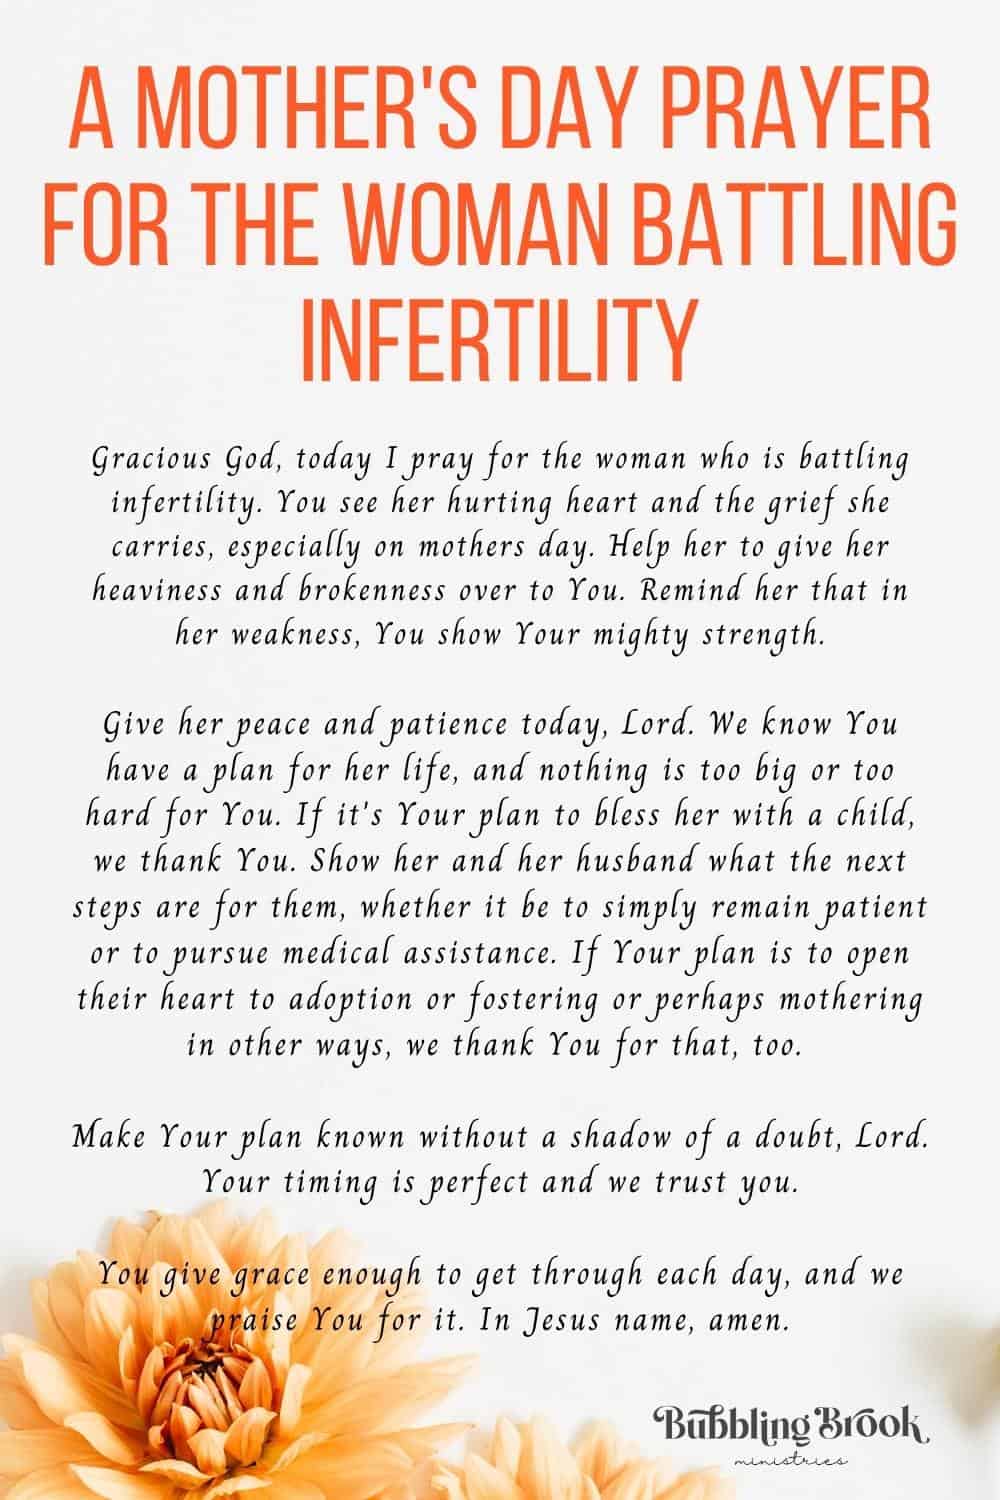 A Mother's Day Prayer For the Woman Battling Infertility